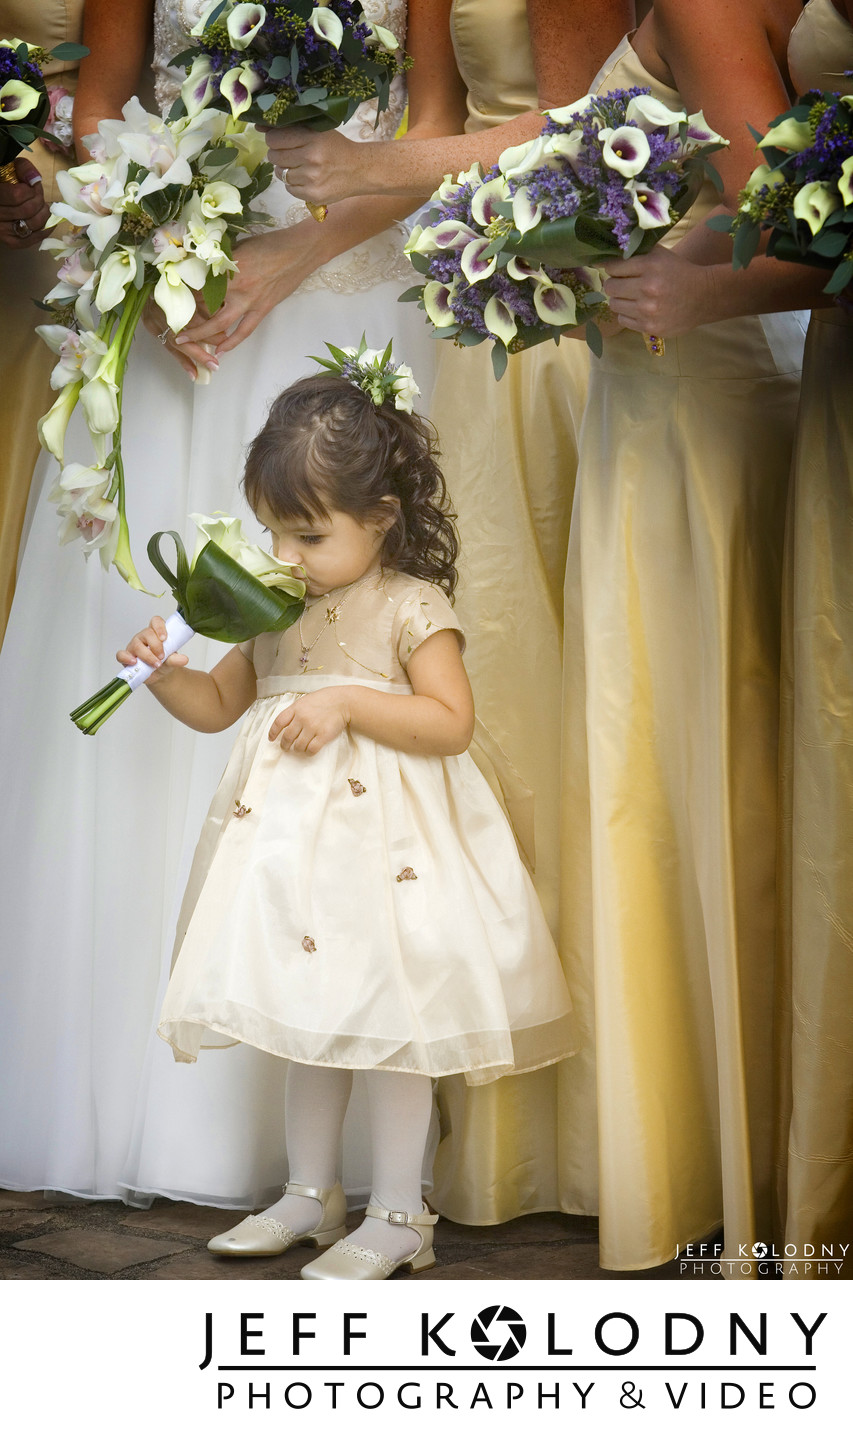 Flower girl smelling flowers at a South Florida wedding